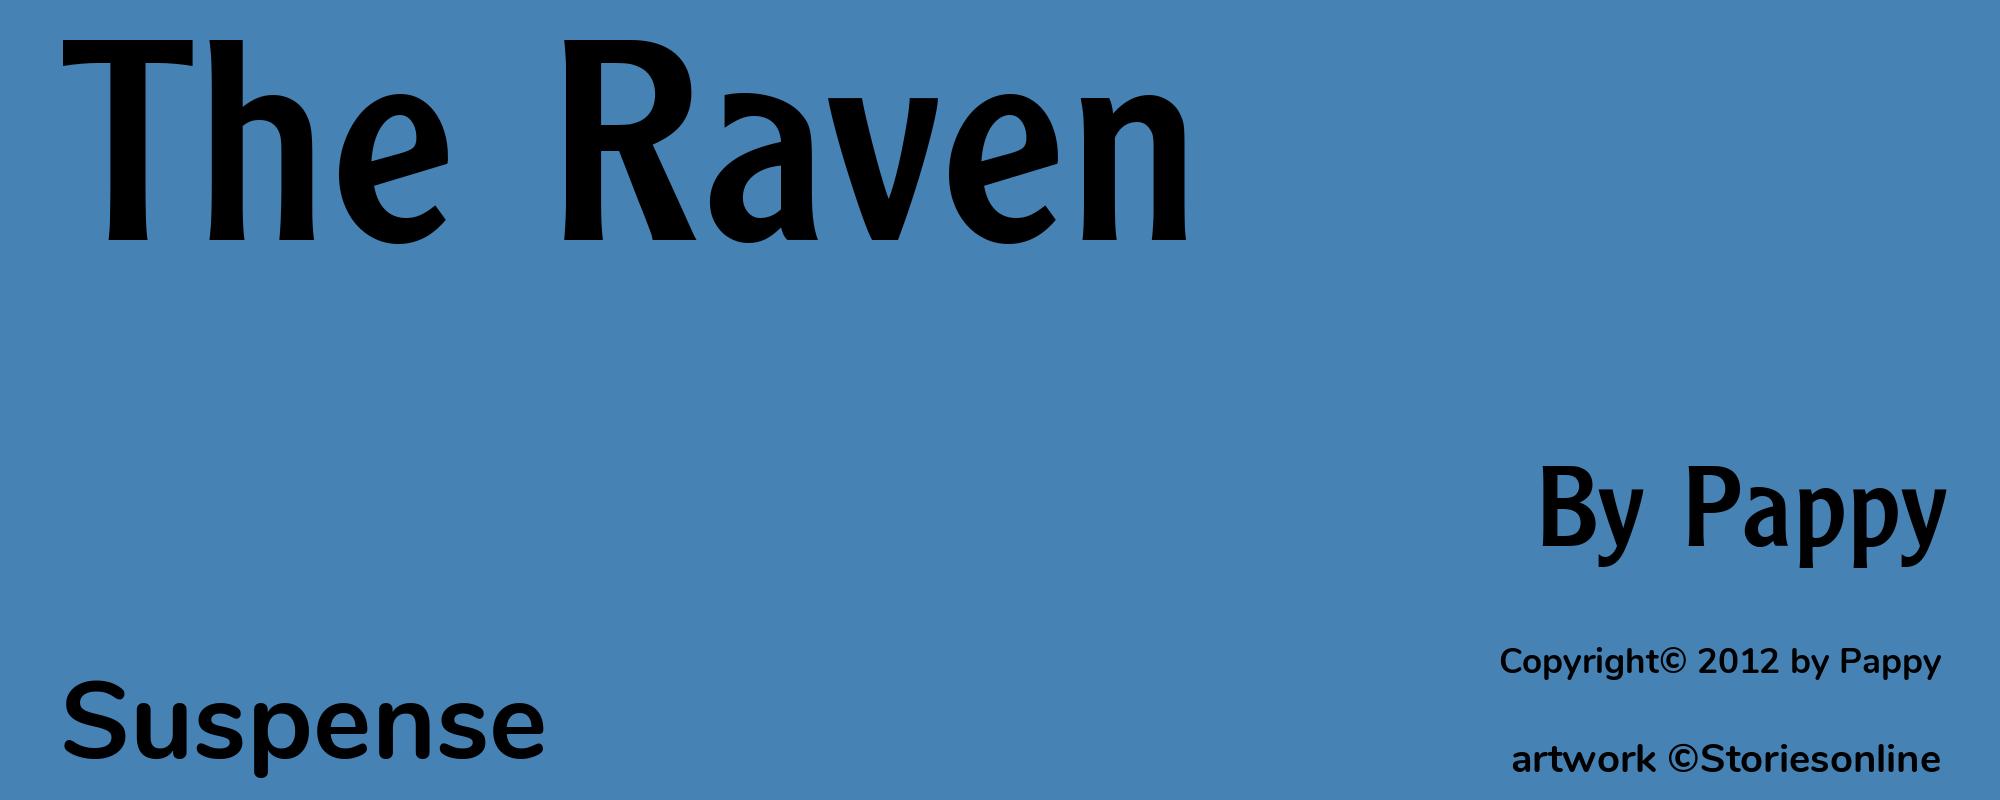 The Raven - Cover